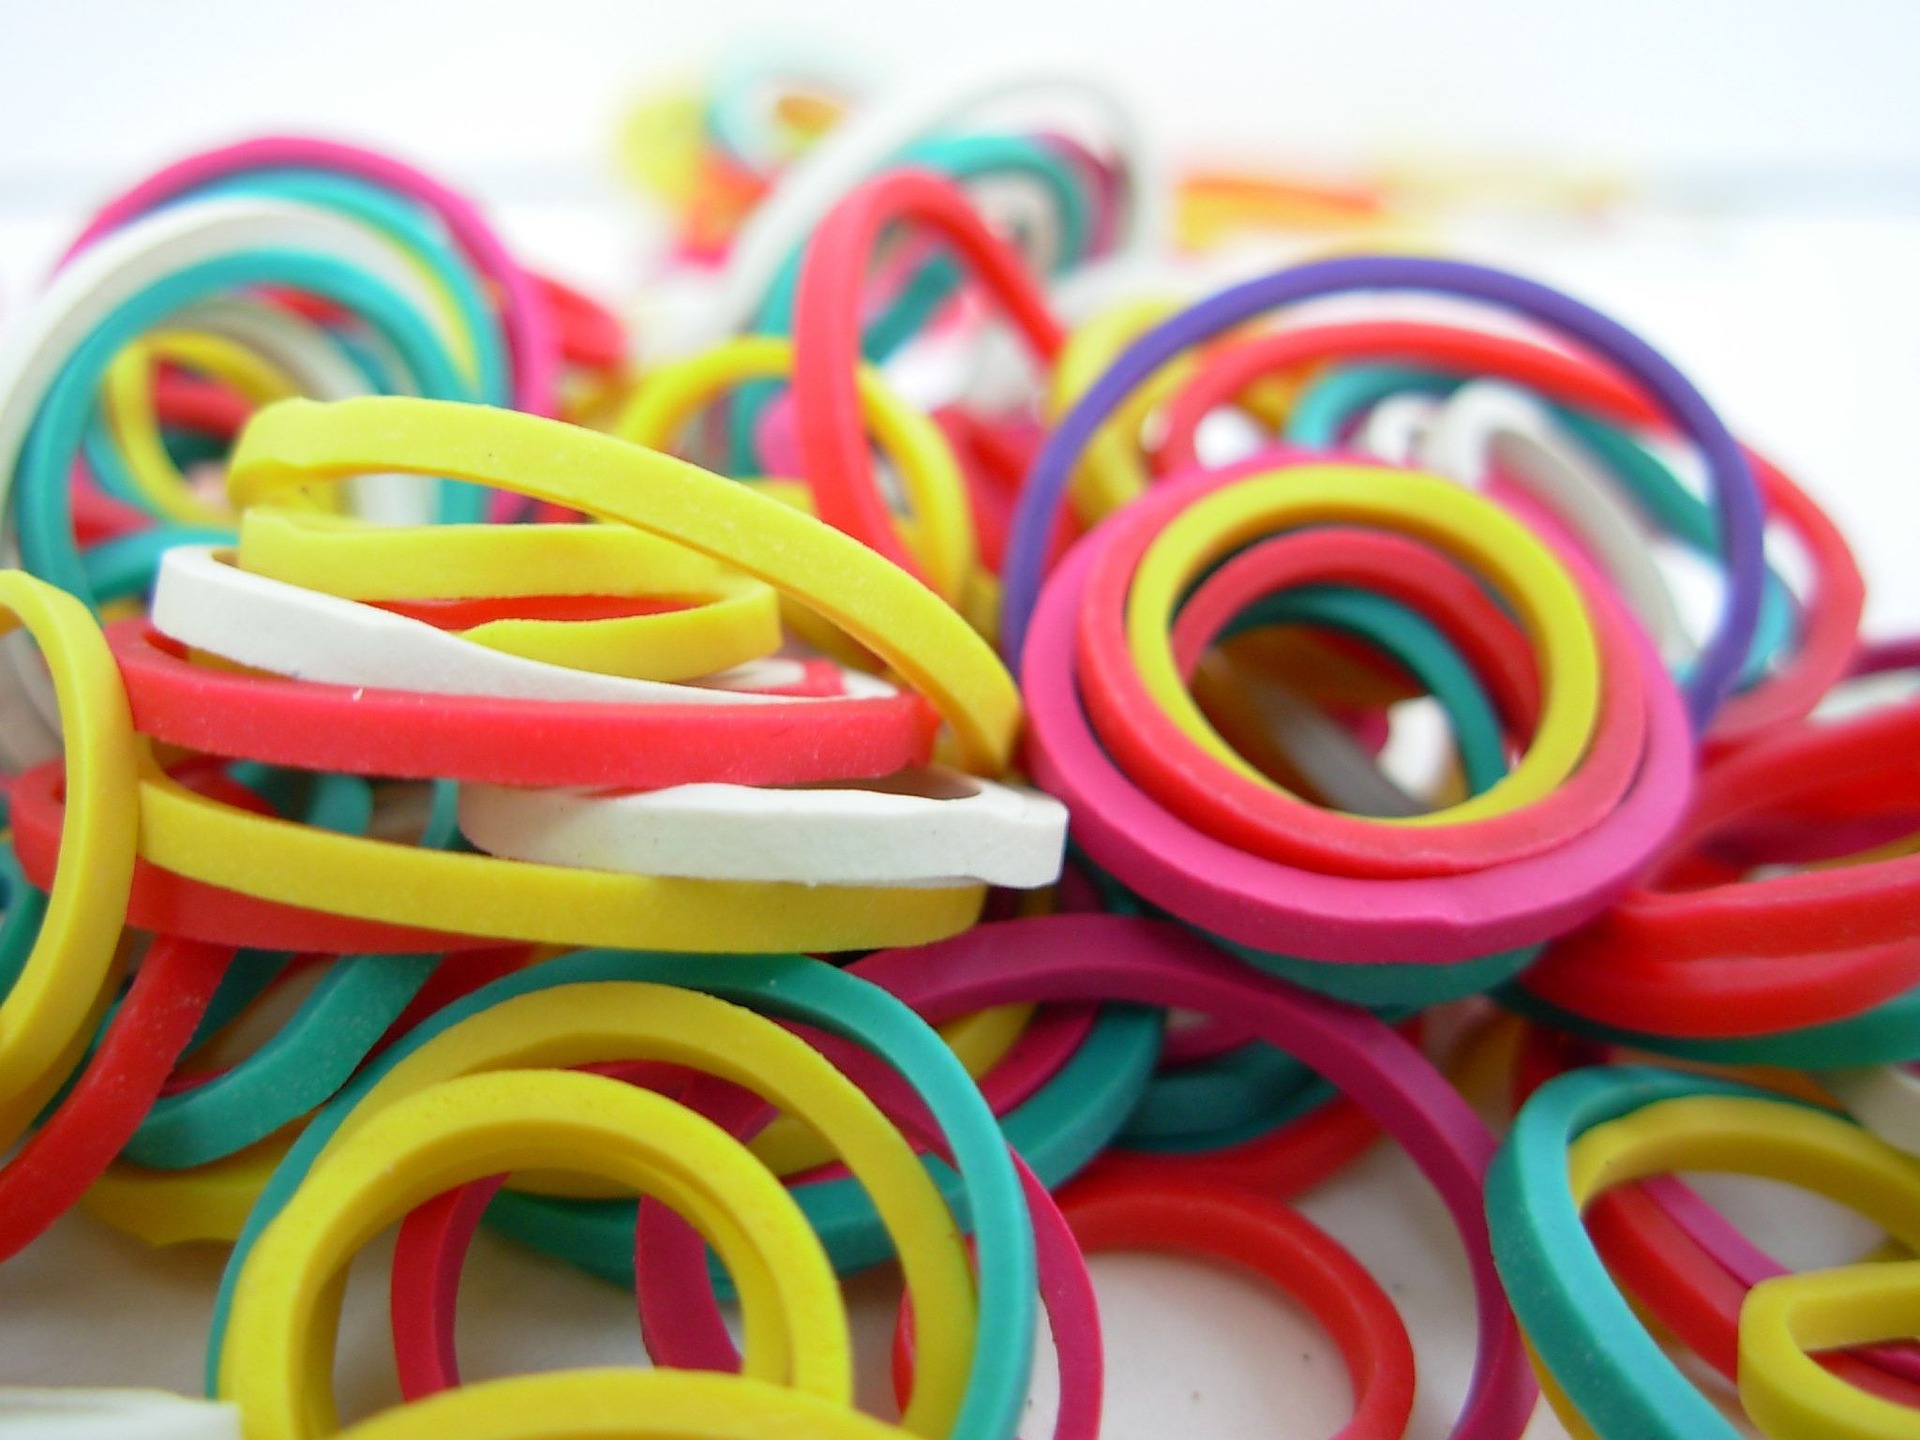 What Does A Rubber Band Have To Do With Inducing Labor?